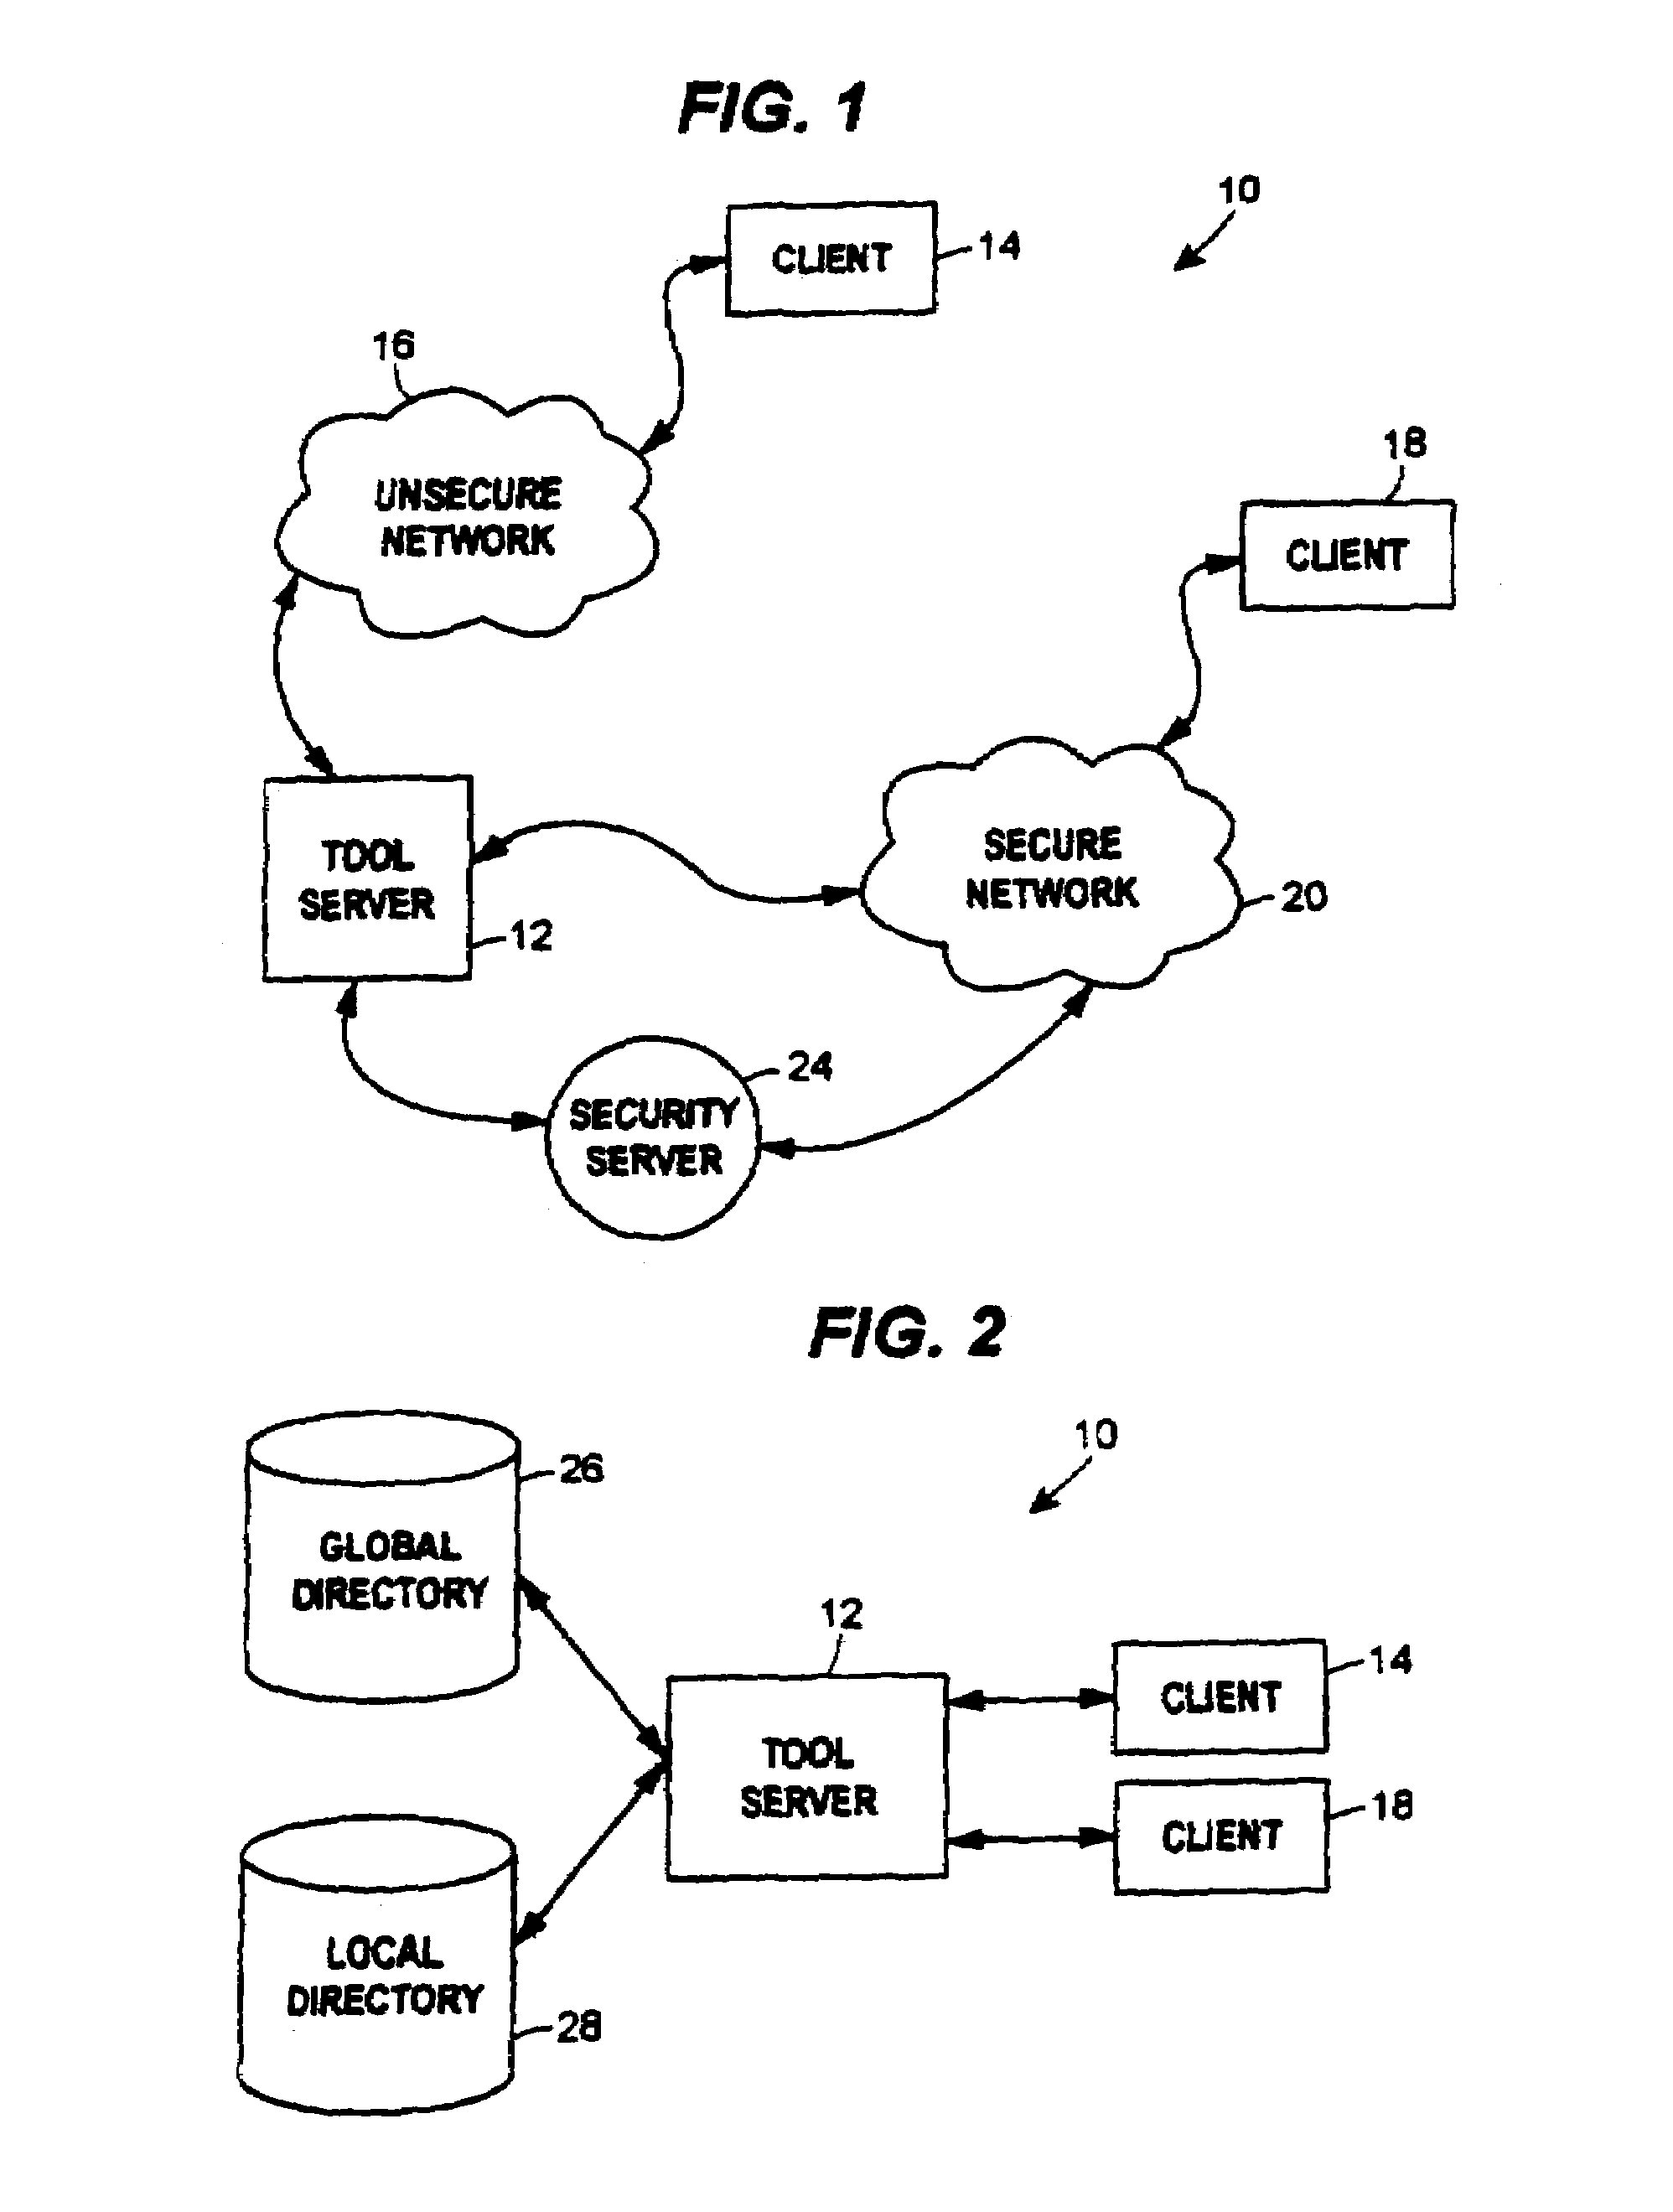 System and method for managing communications and collaboration among team members